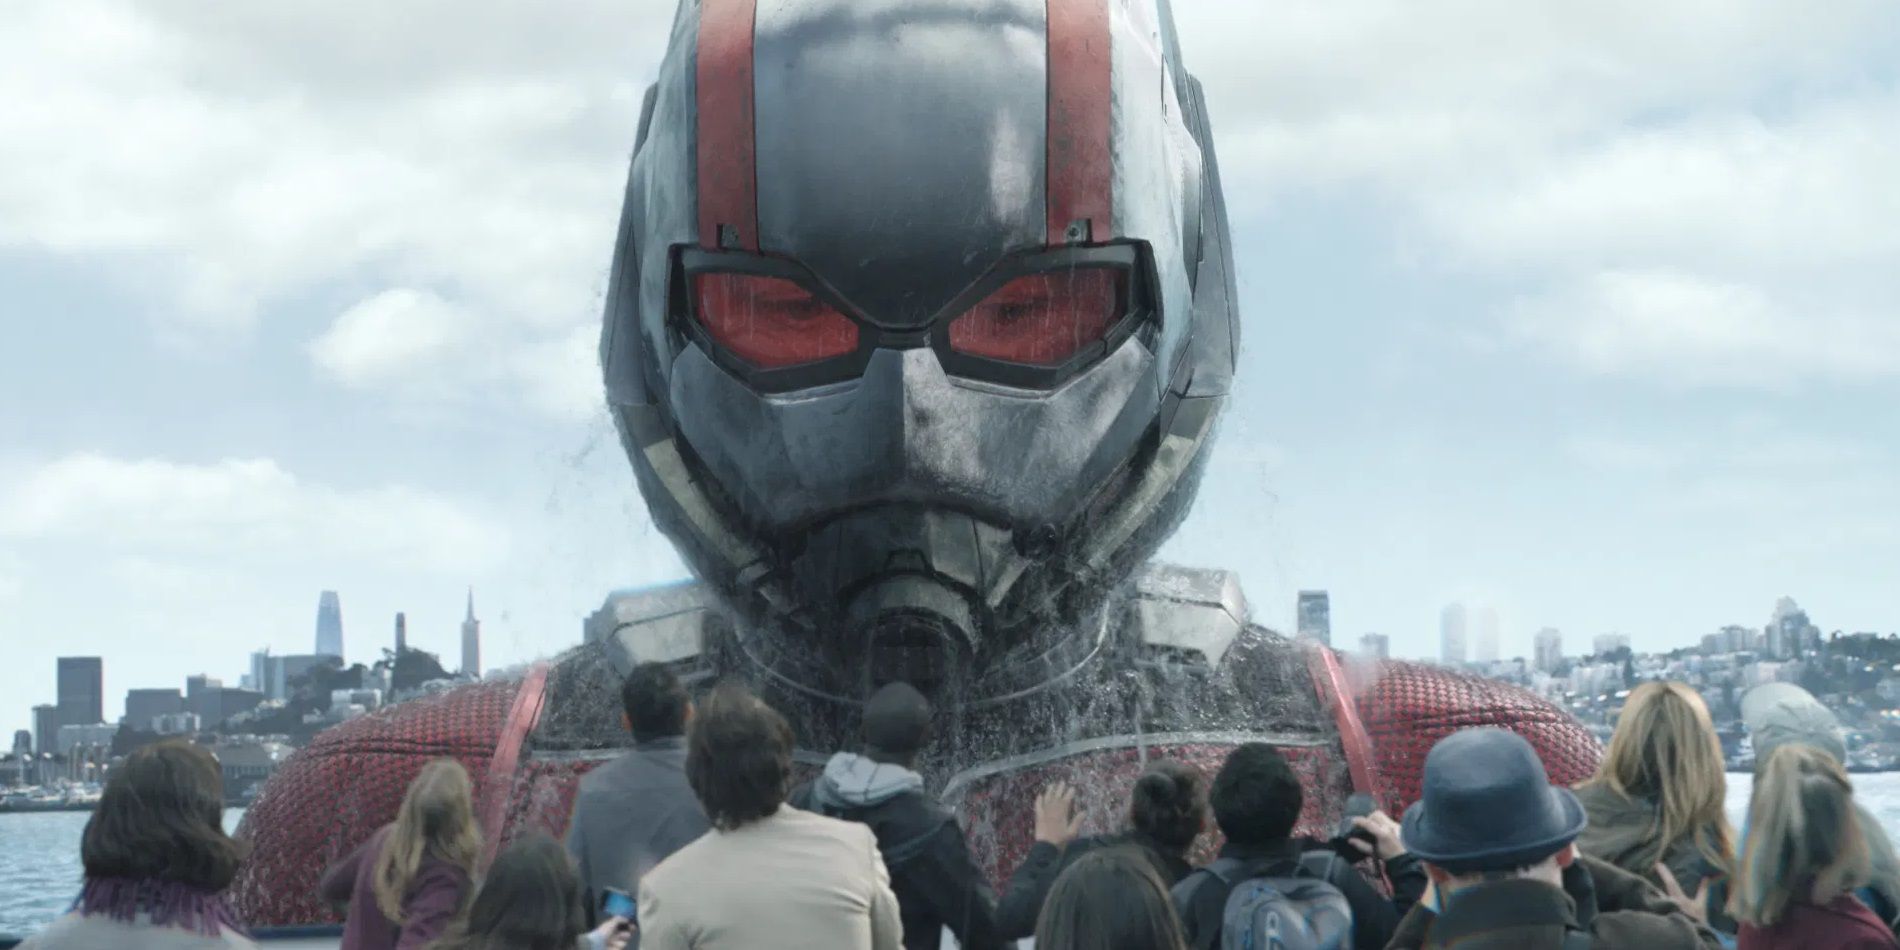 Giant Man rises out of the water on the San Francisco pier in Ant-Man and the Wasp